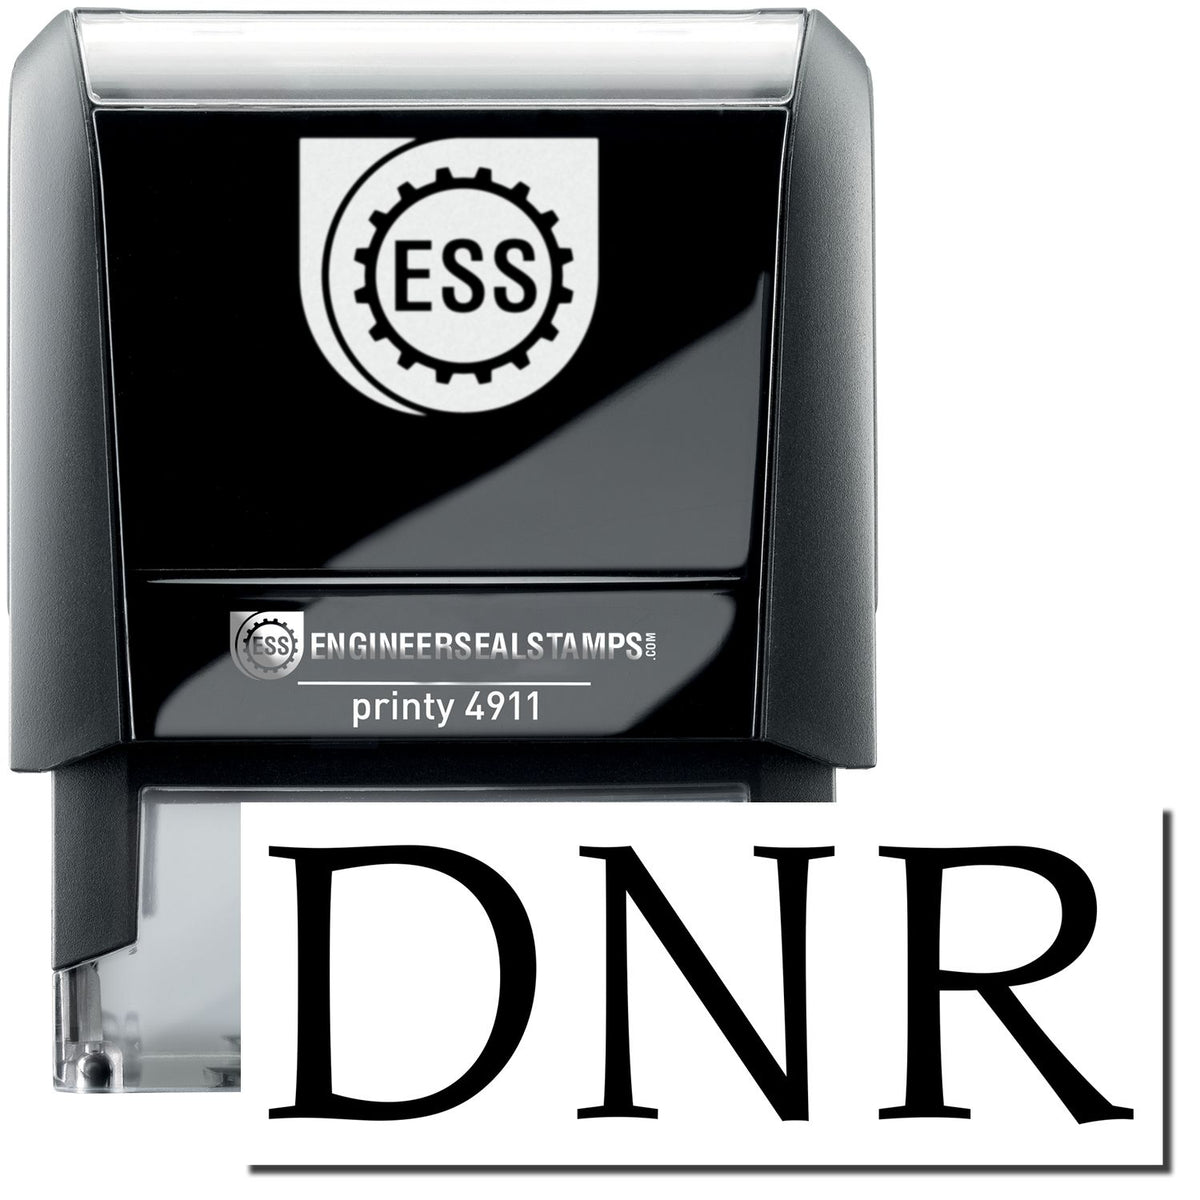 A self-inking stamp with a stamped image showing how the text &quot;DNR&quot; is displayed after stamping.